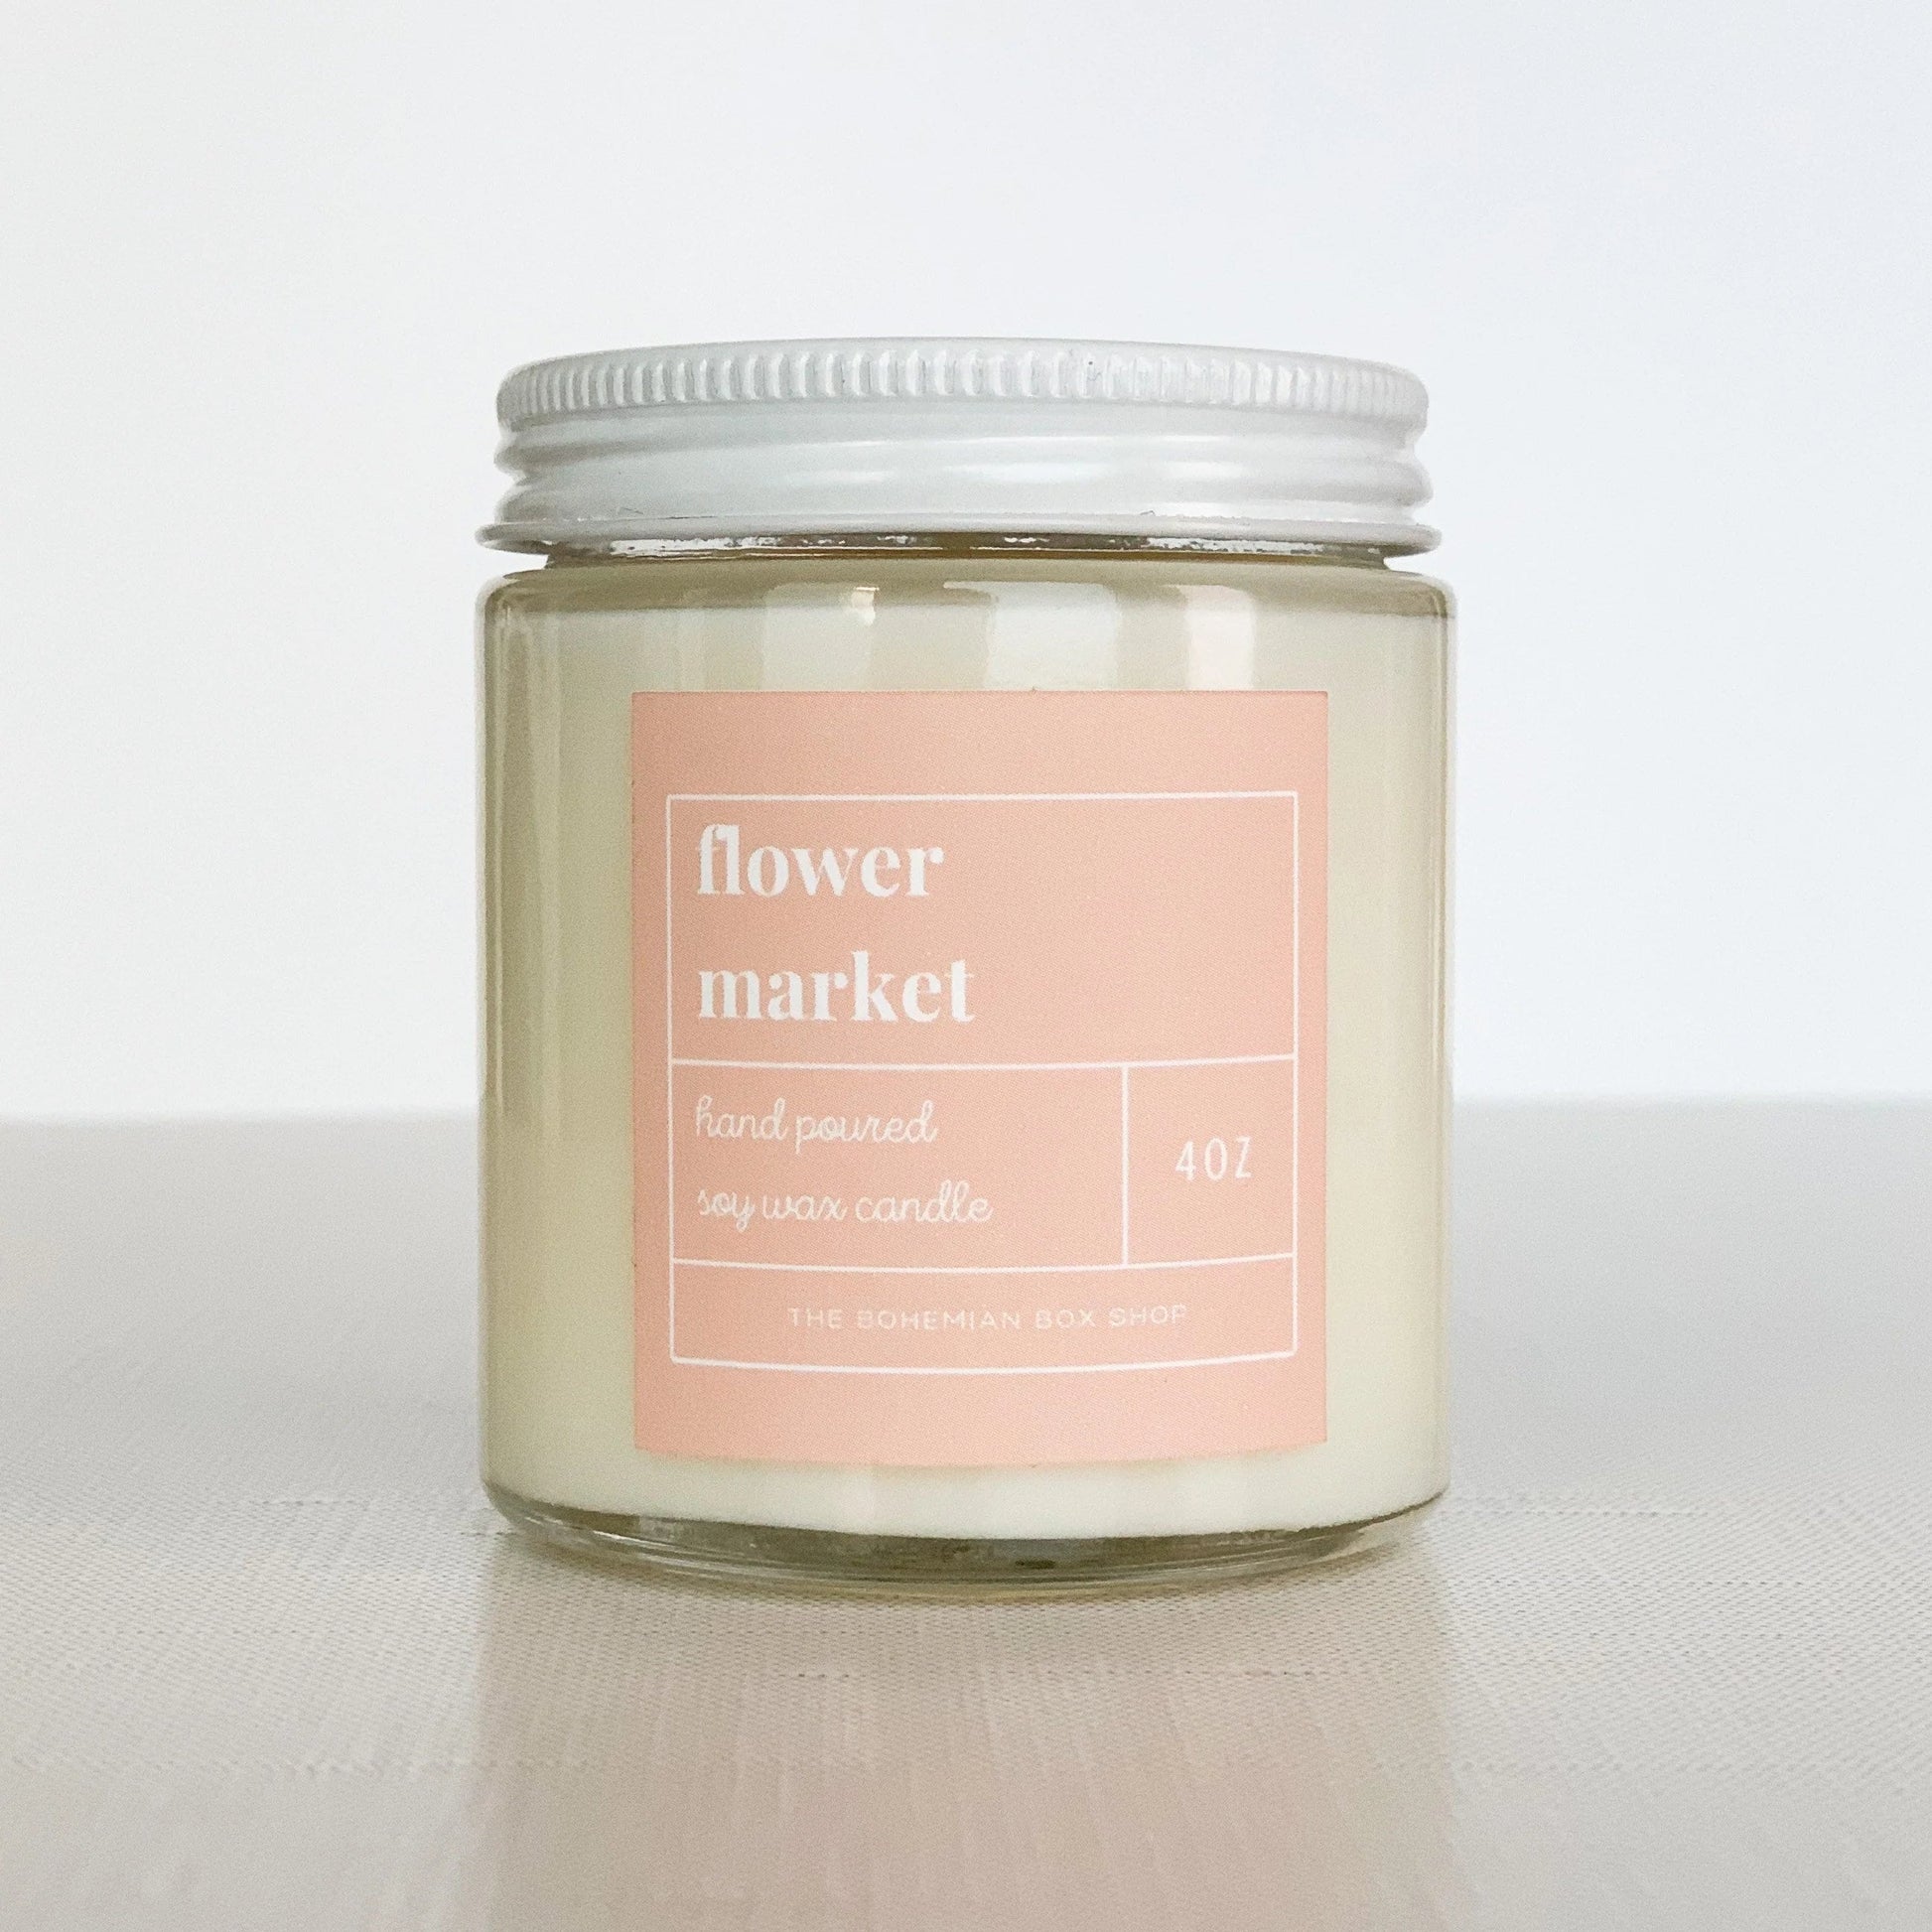 Flower Market 4oz Soy Candle in a clear glass jar, white lid and blush pink label